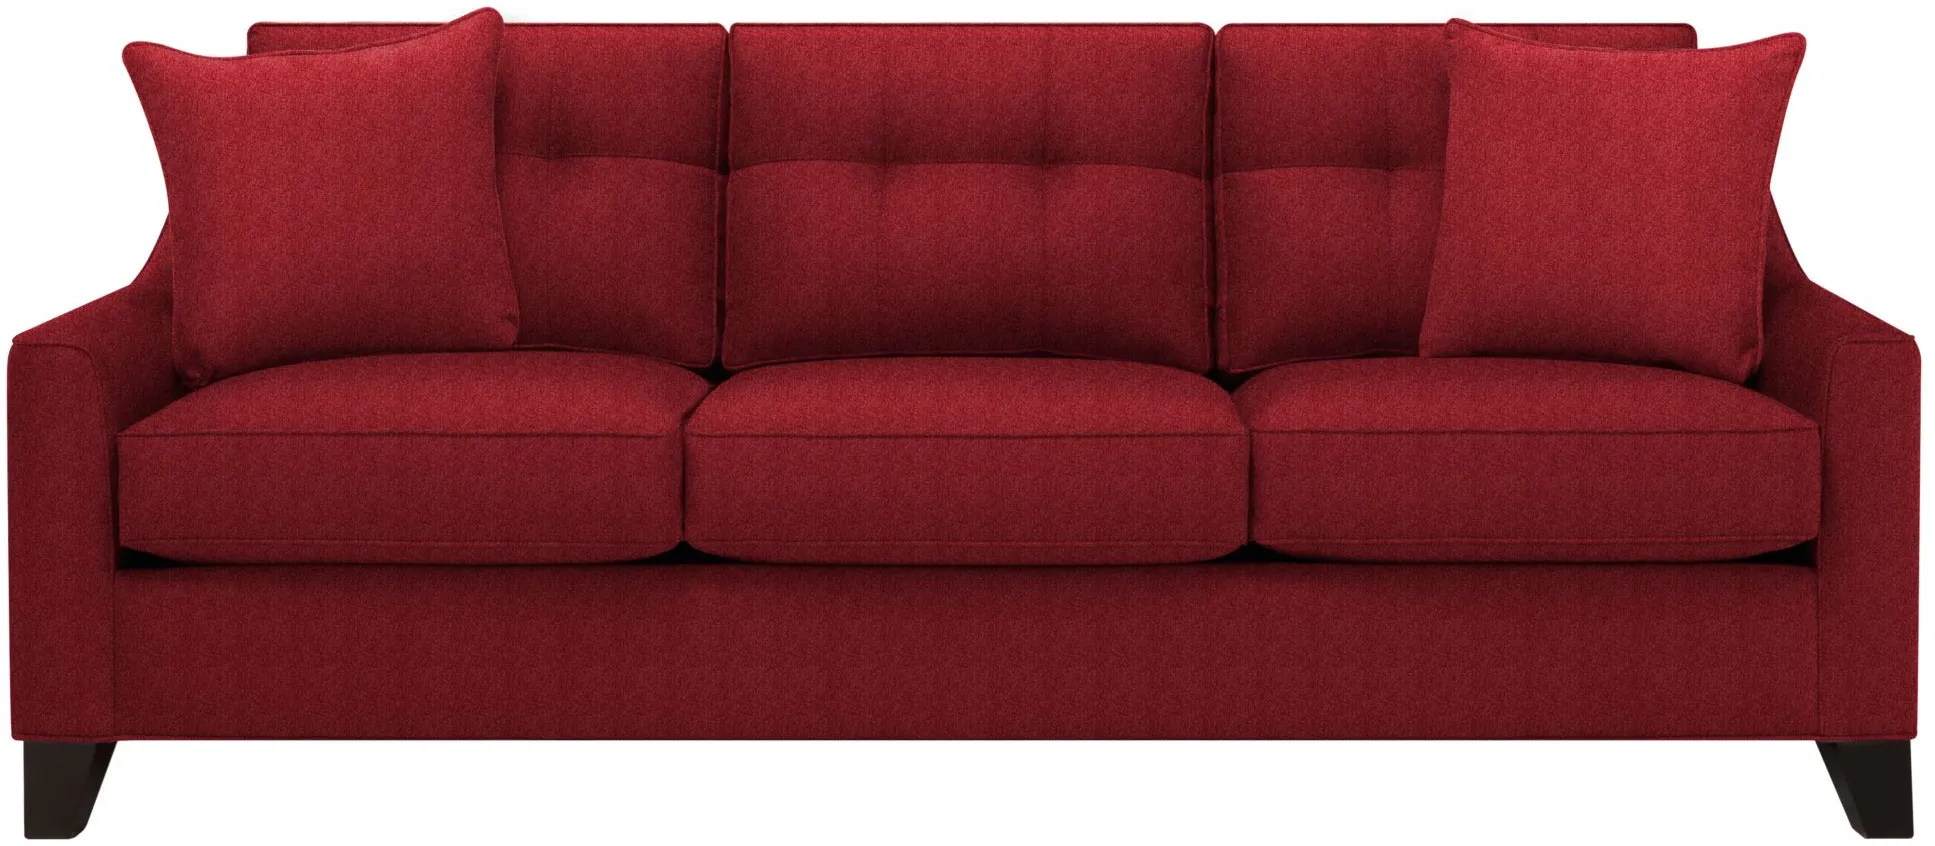 Carmine Sofa in Suede so Soft Cardinal by H.M. Richards